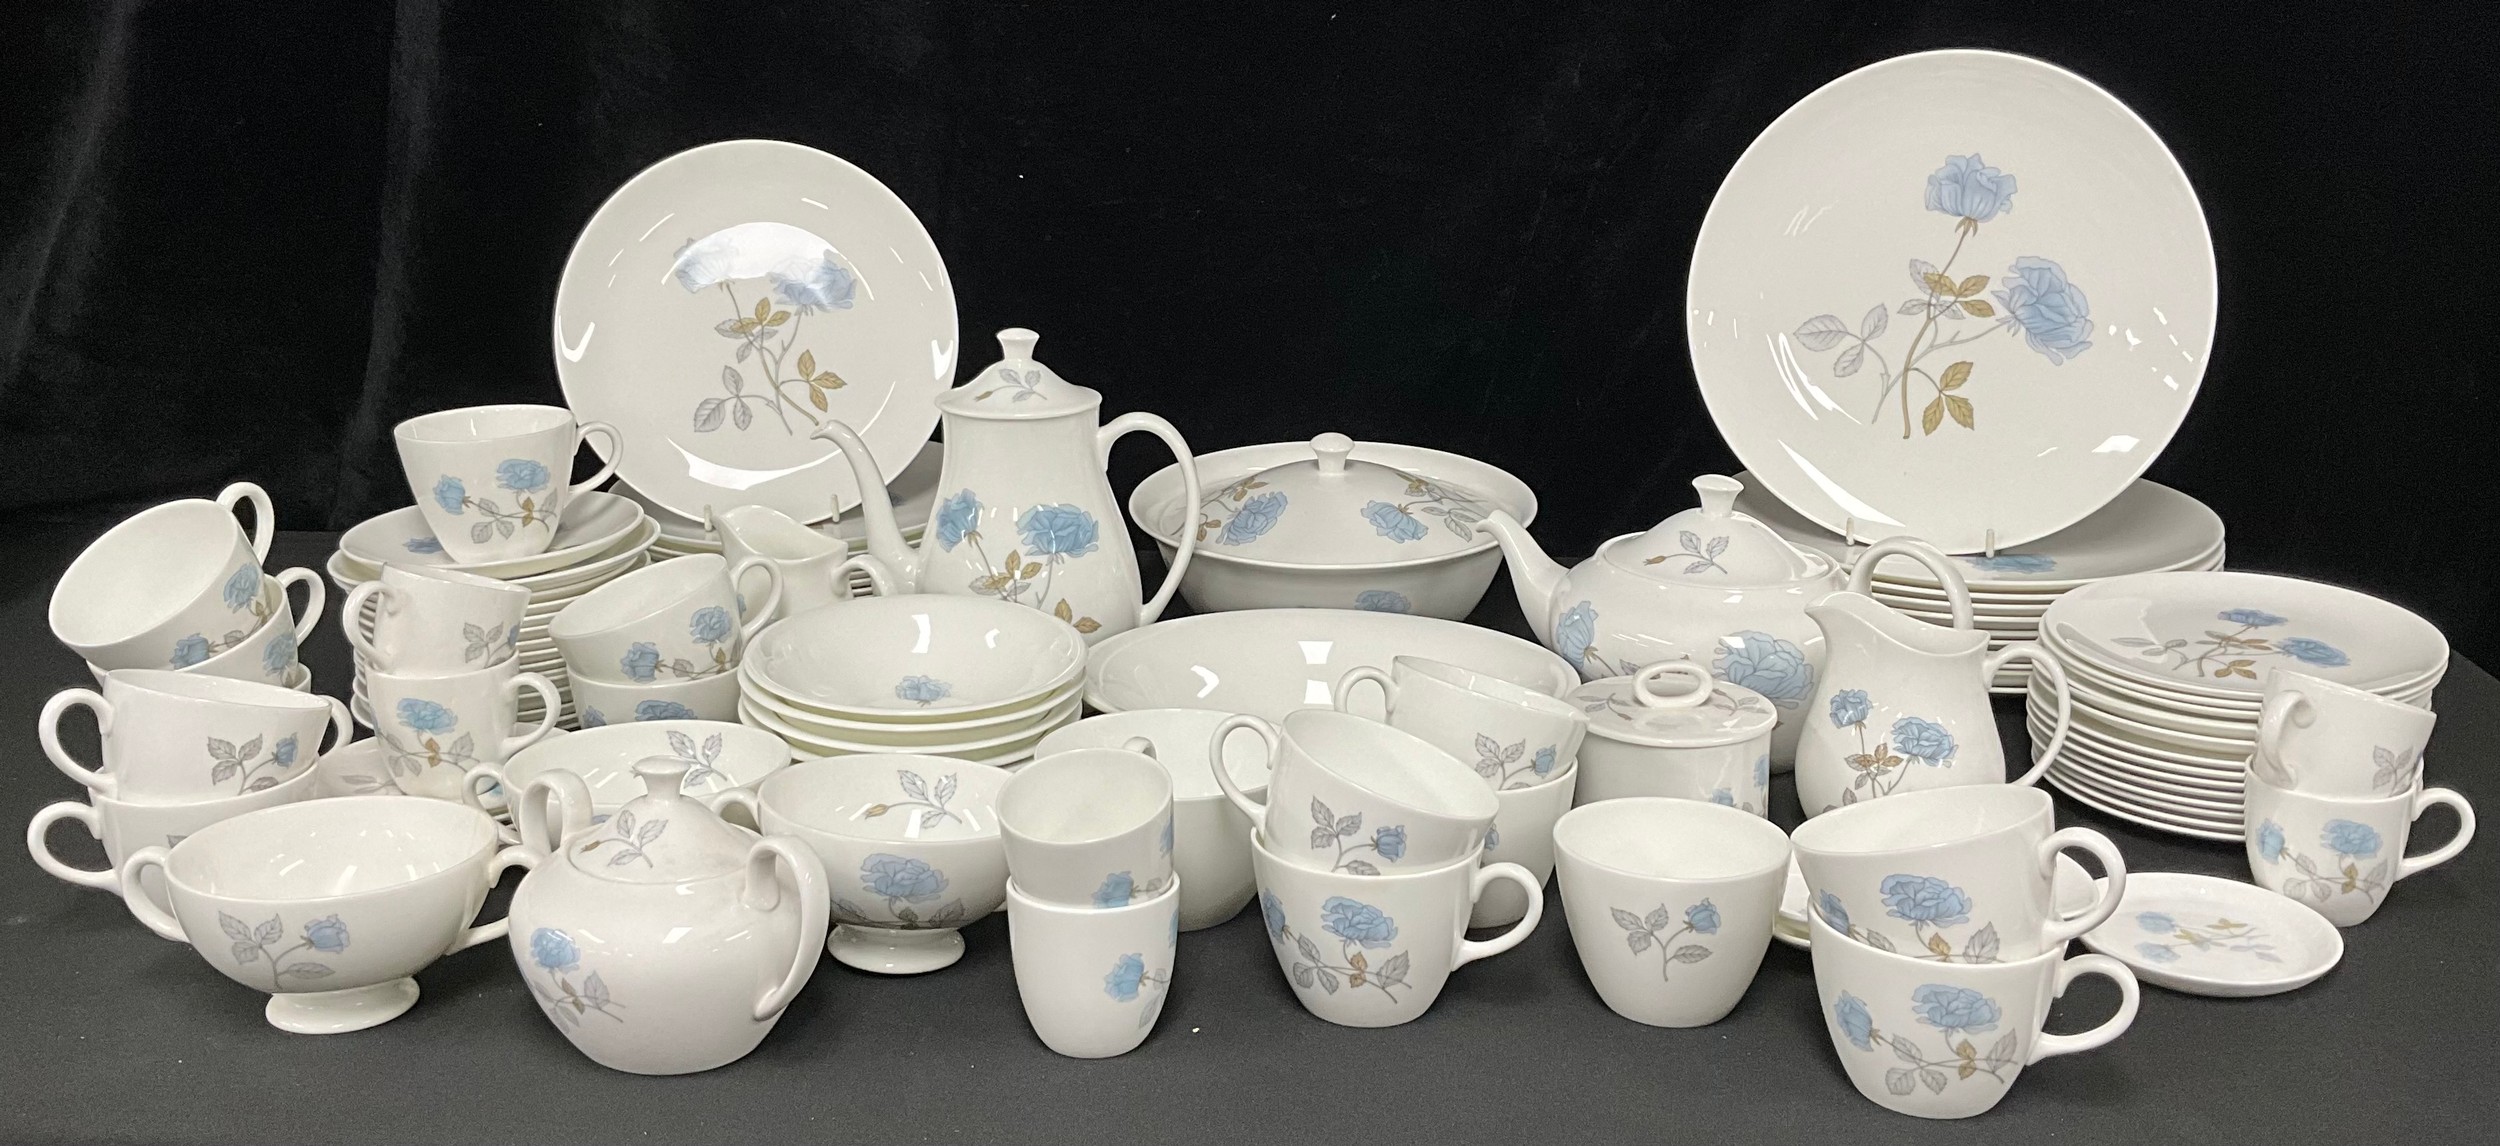 A Wedgwood Ice Rose pattern part dinner, tea and coffee service, comprising dinner plates, dessert